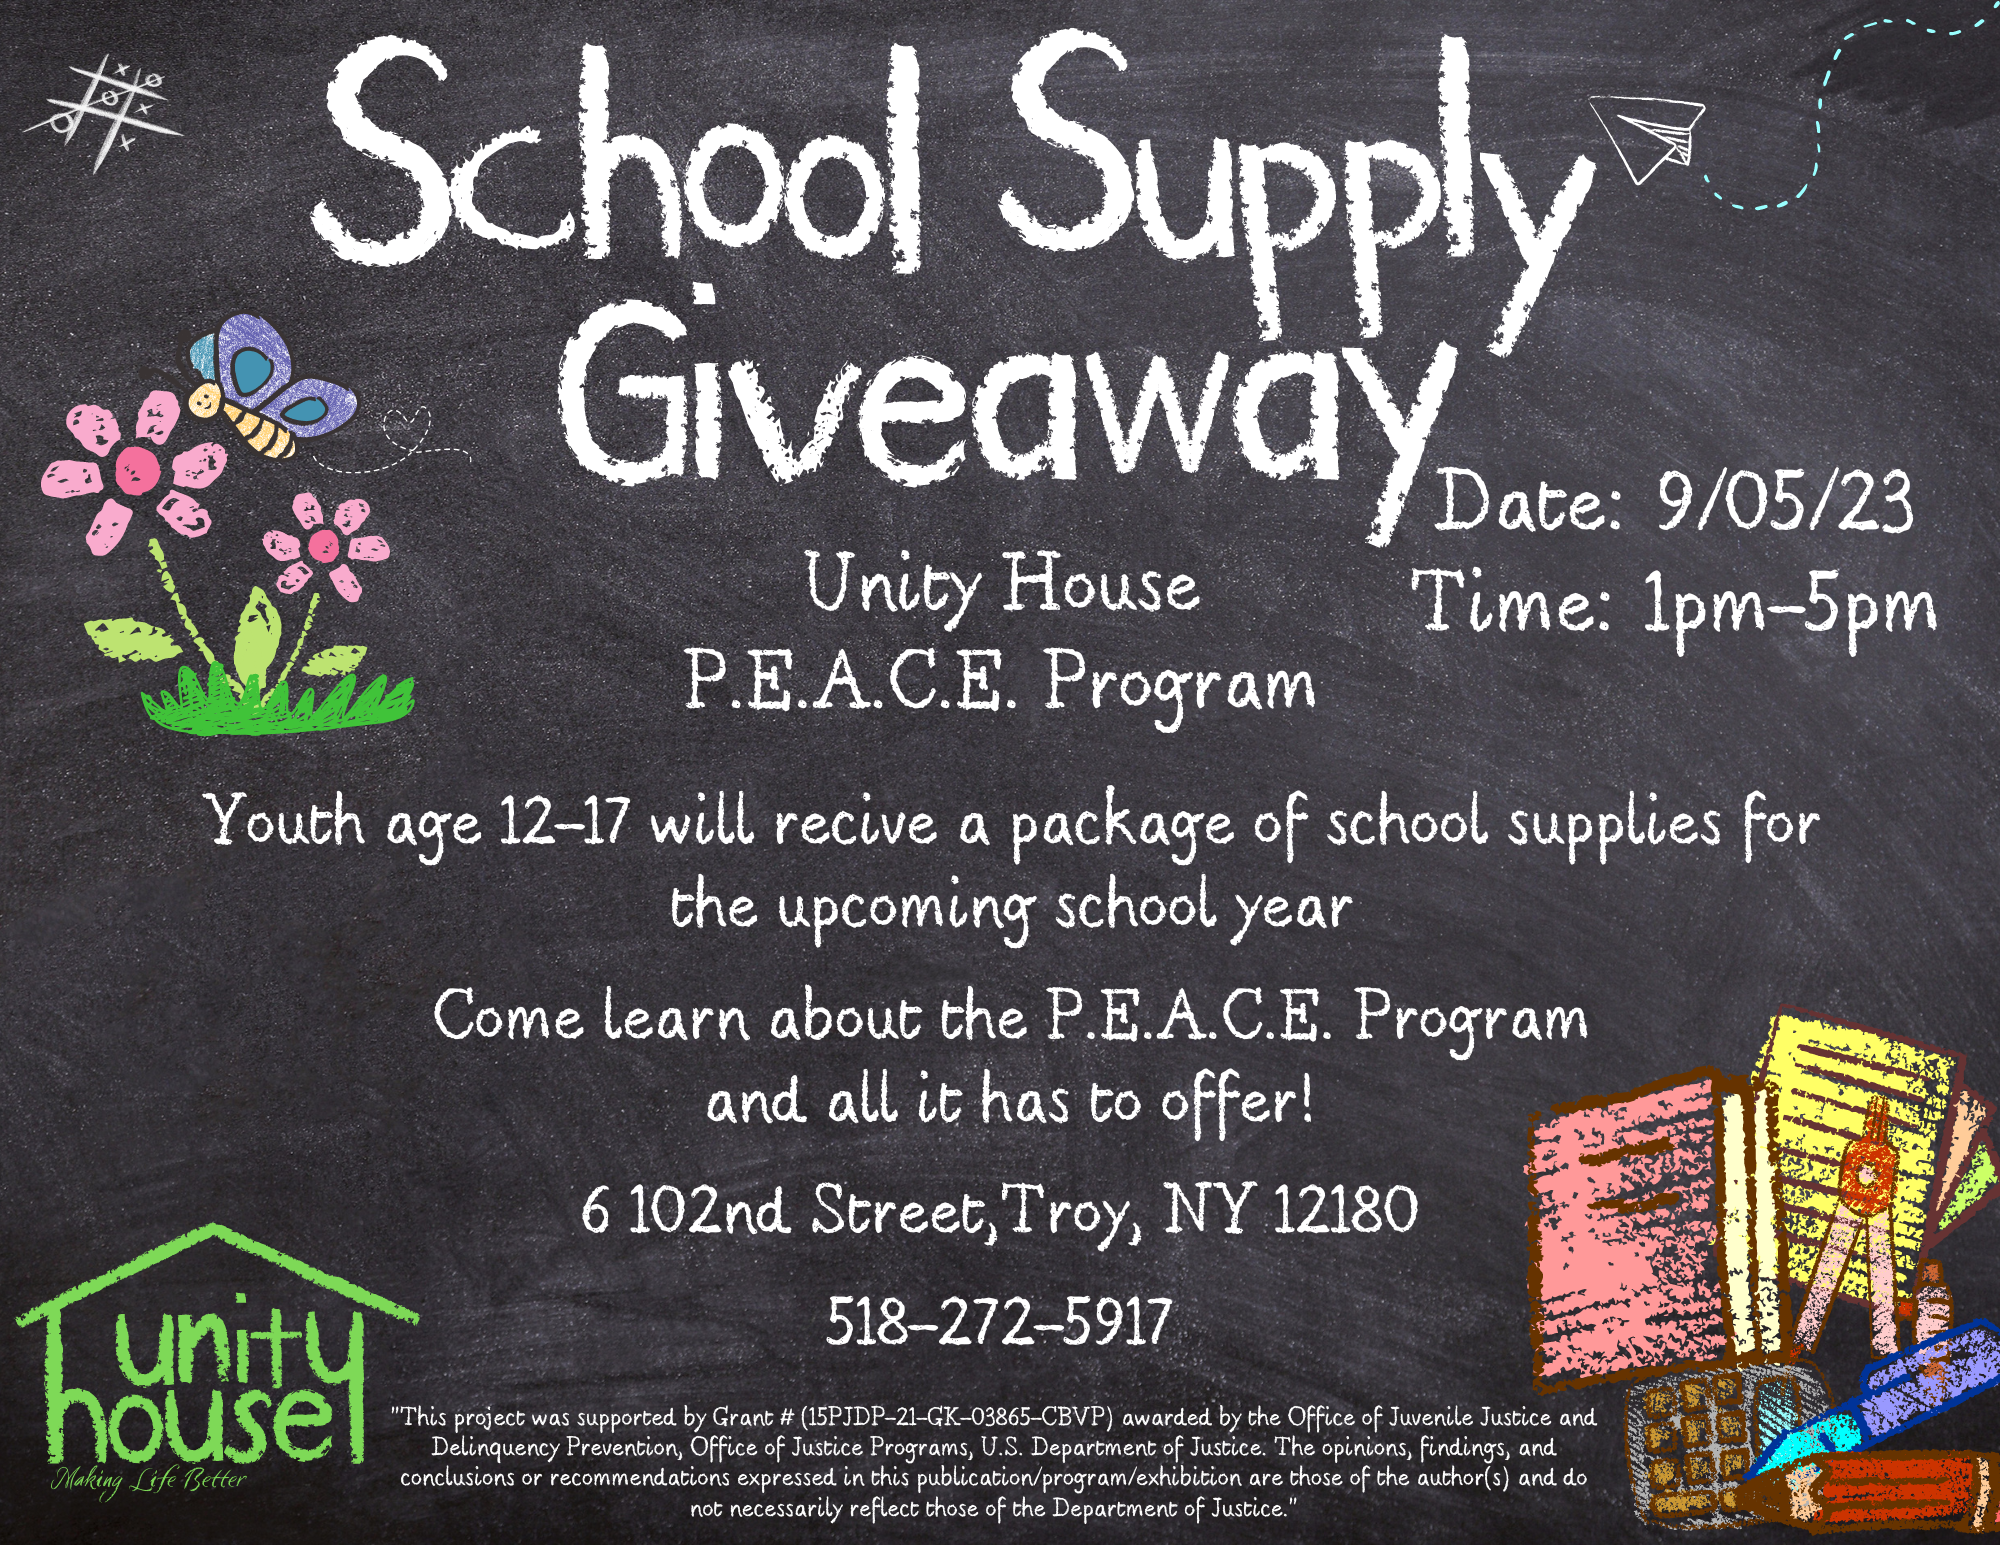 School Supply Giveaway with the Unity House P.E.A.C.E Program